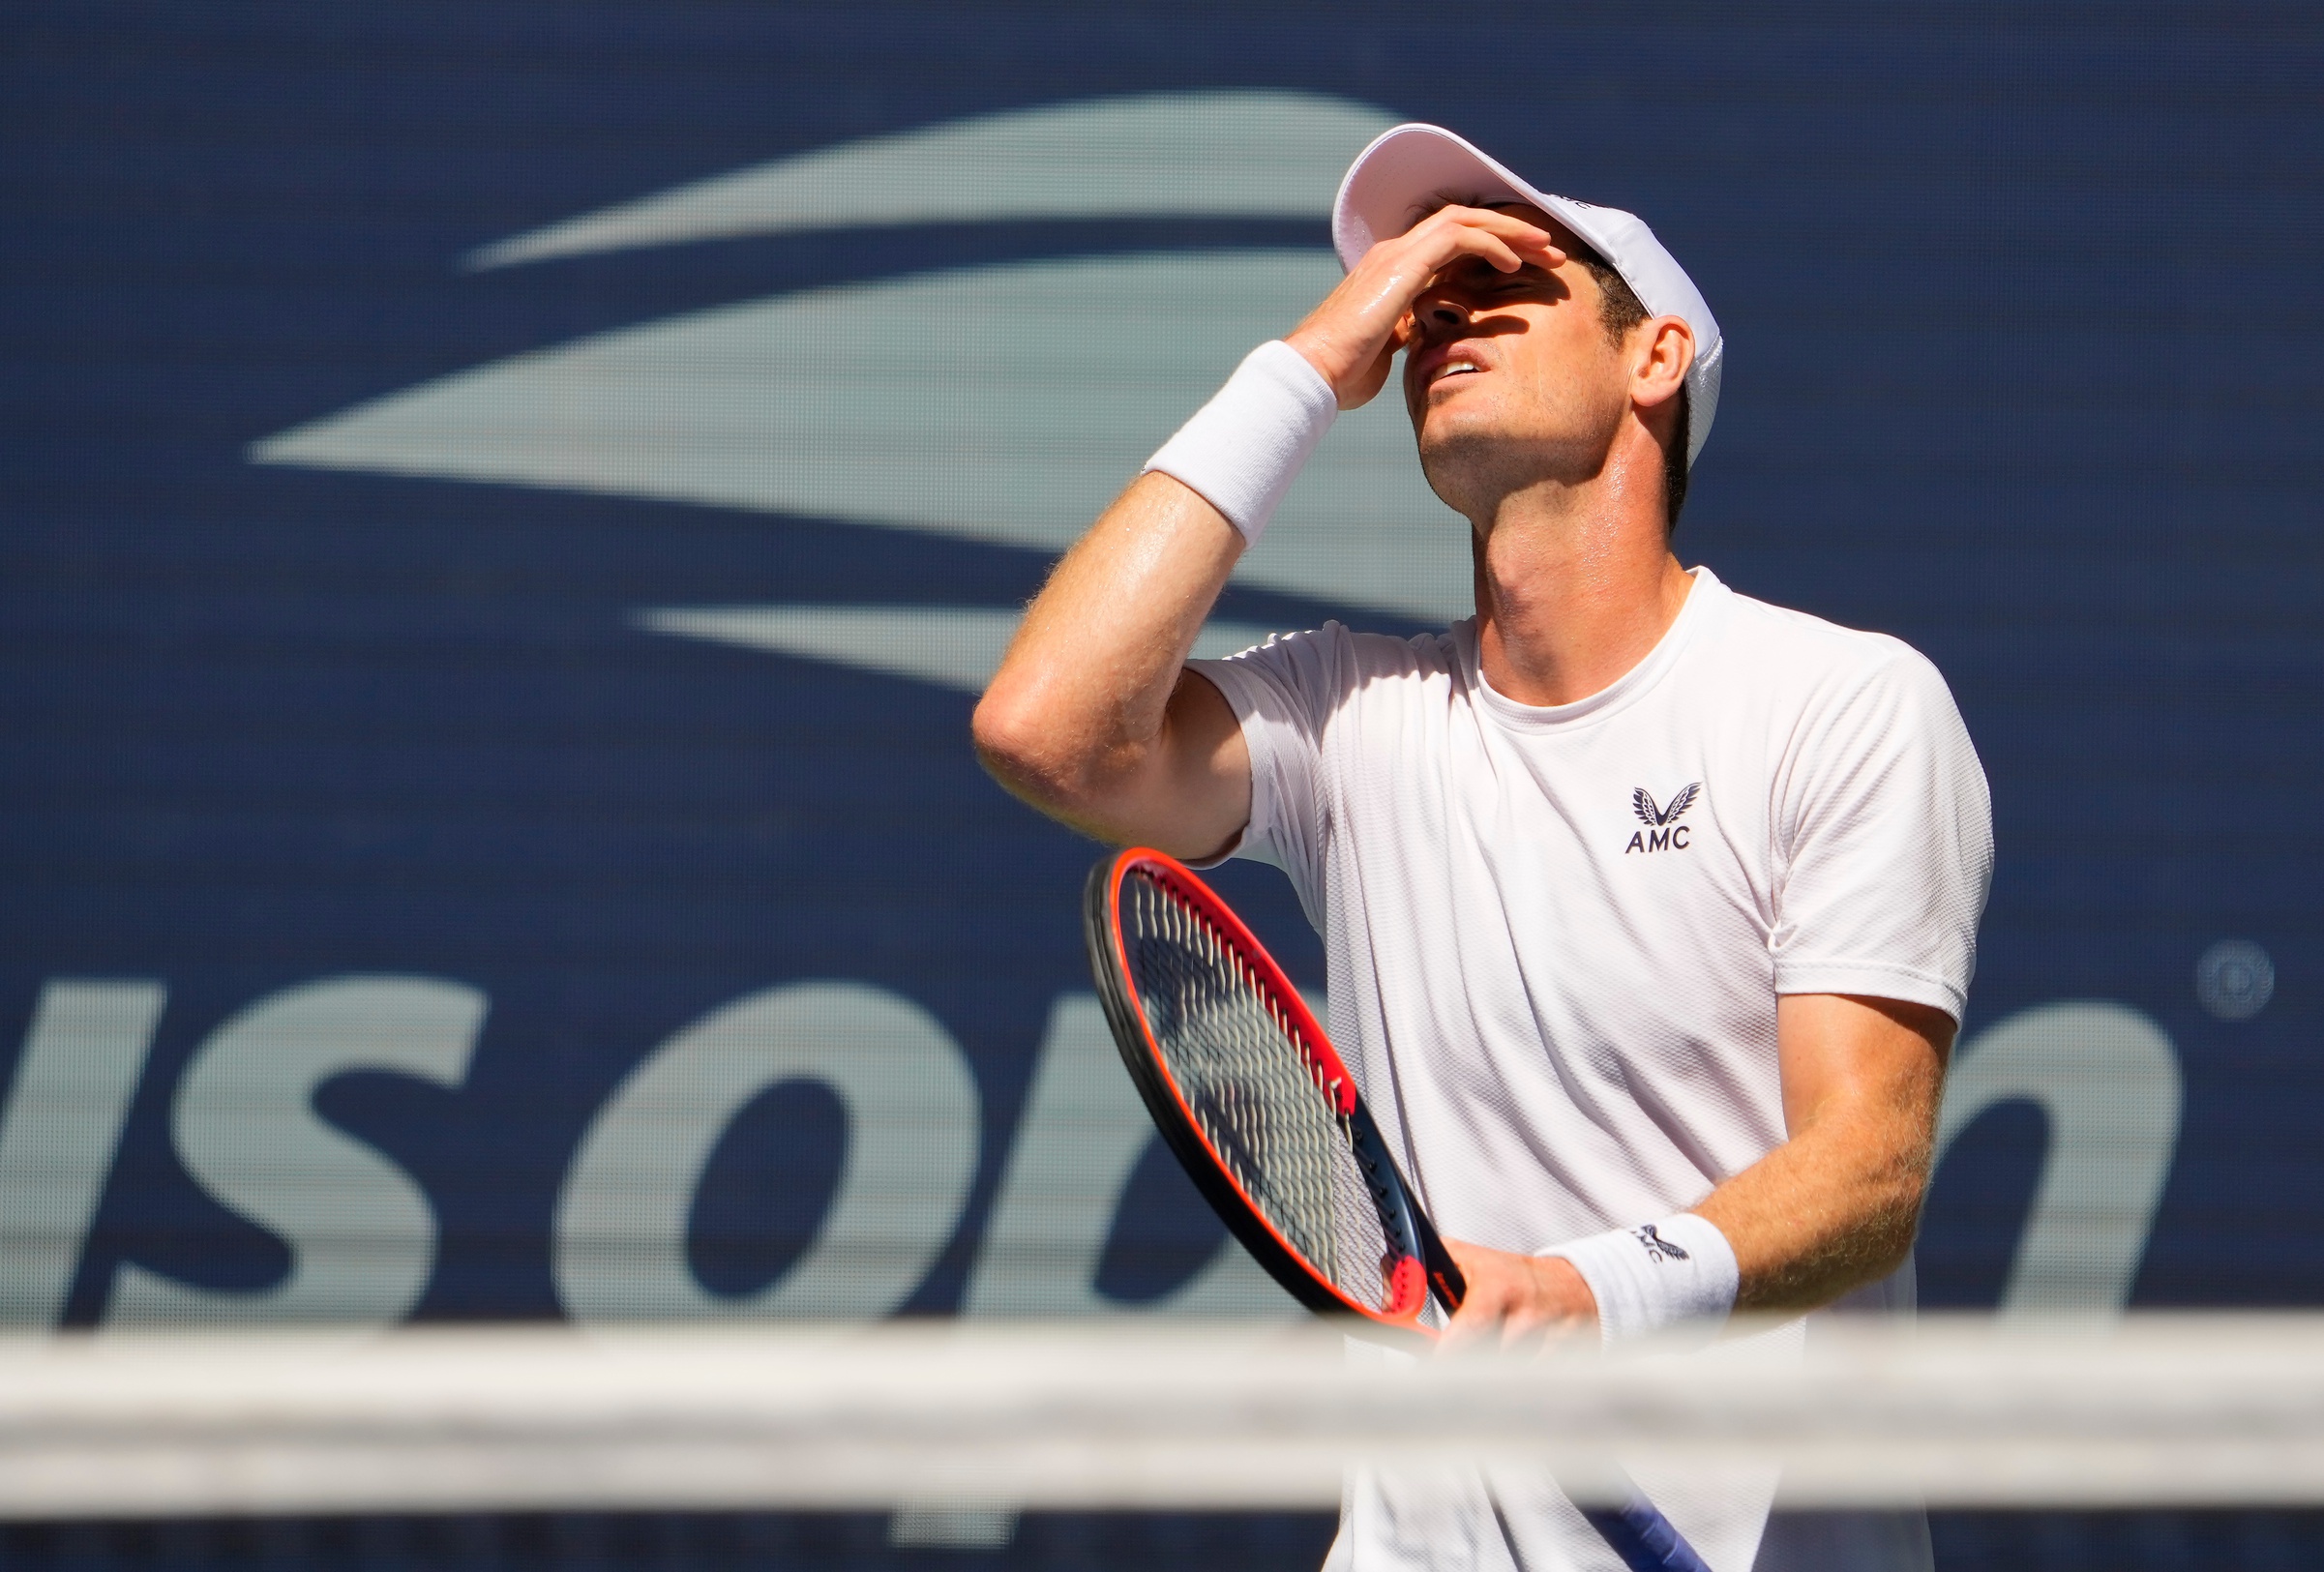 Andy Murray has withdrawn from the ATP Tokyo Open.